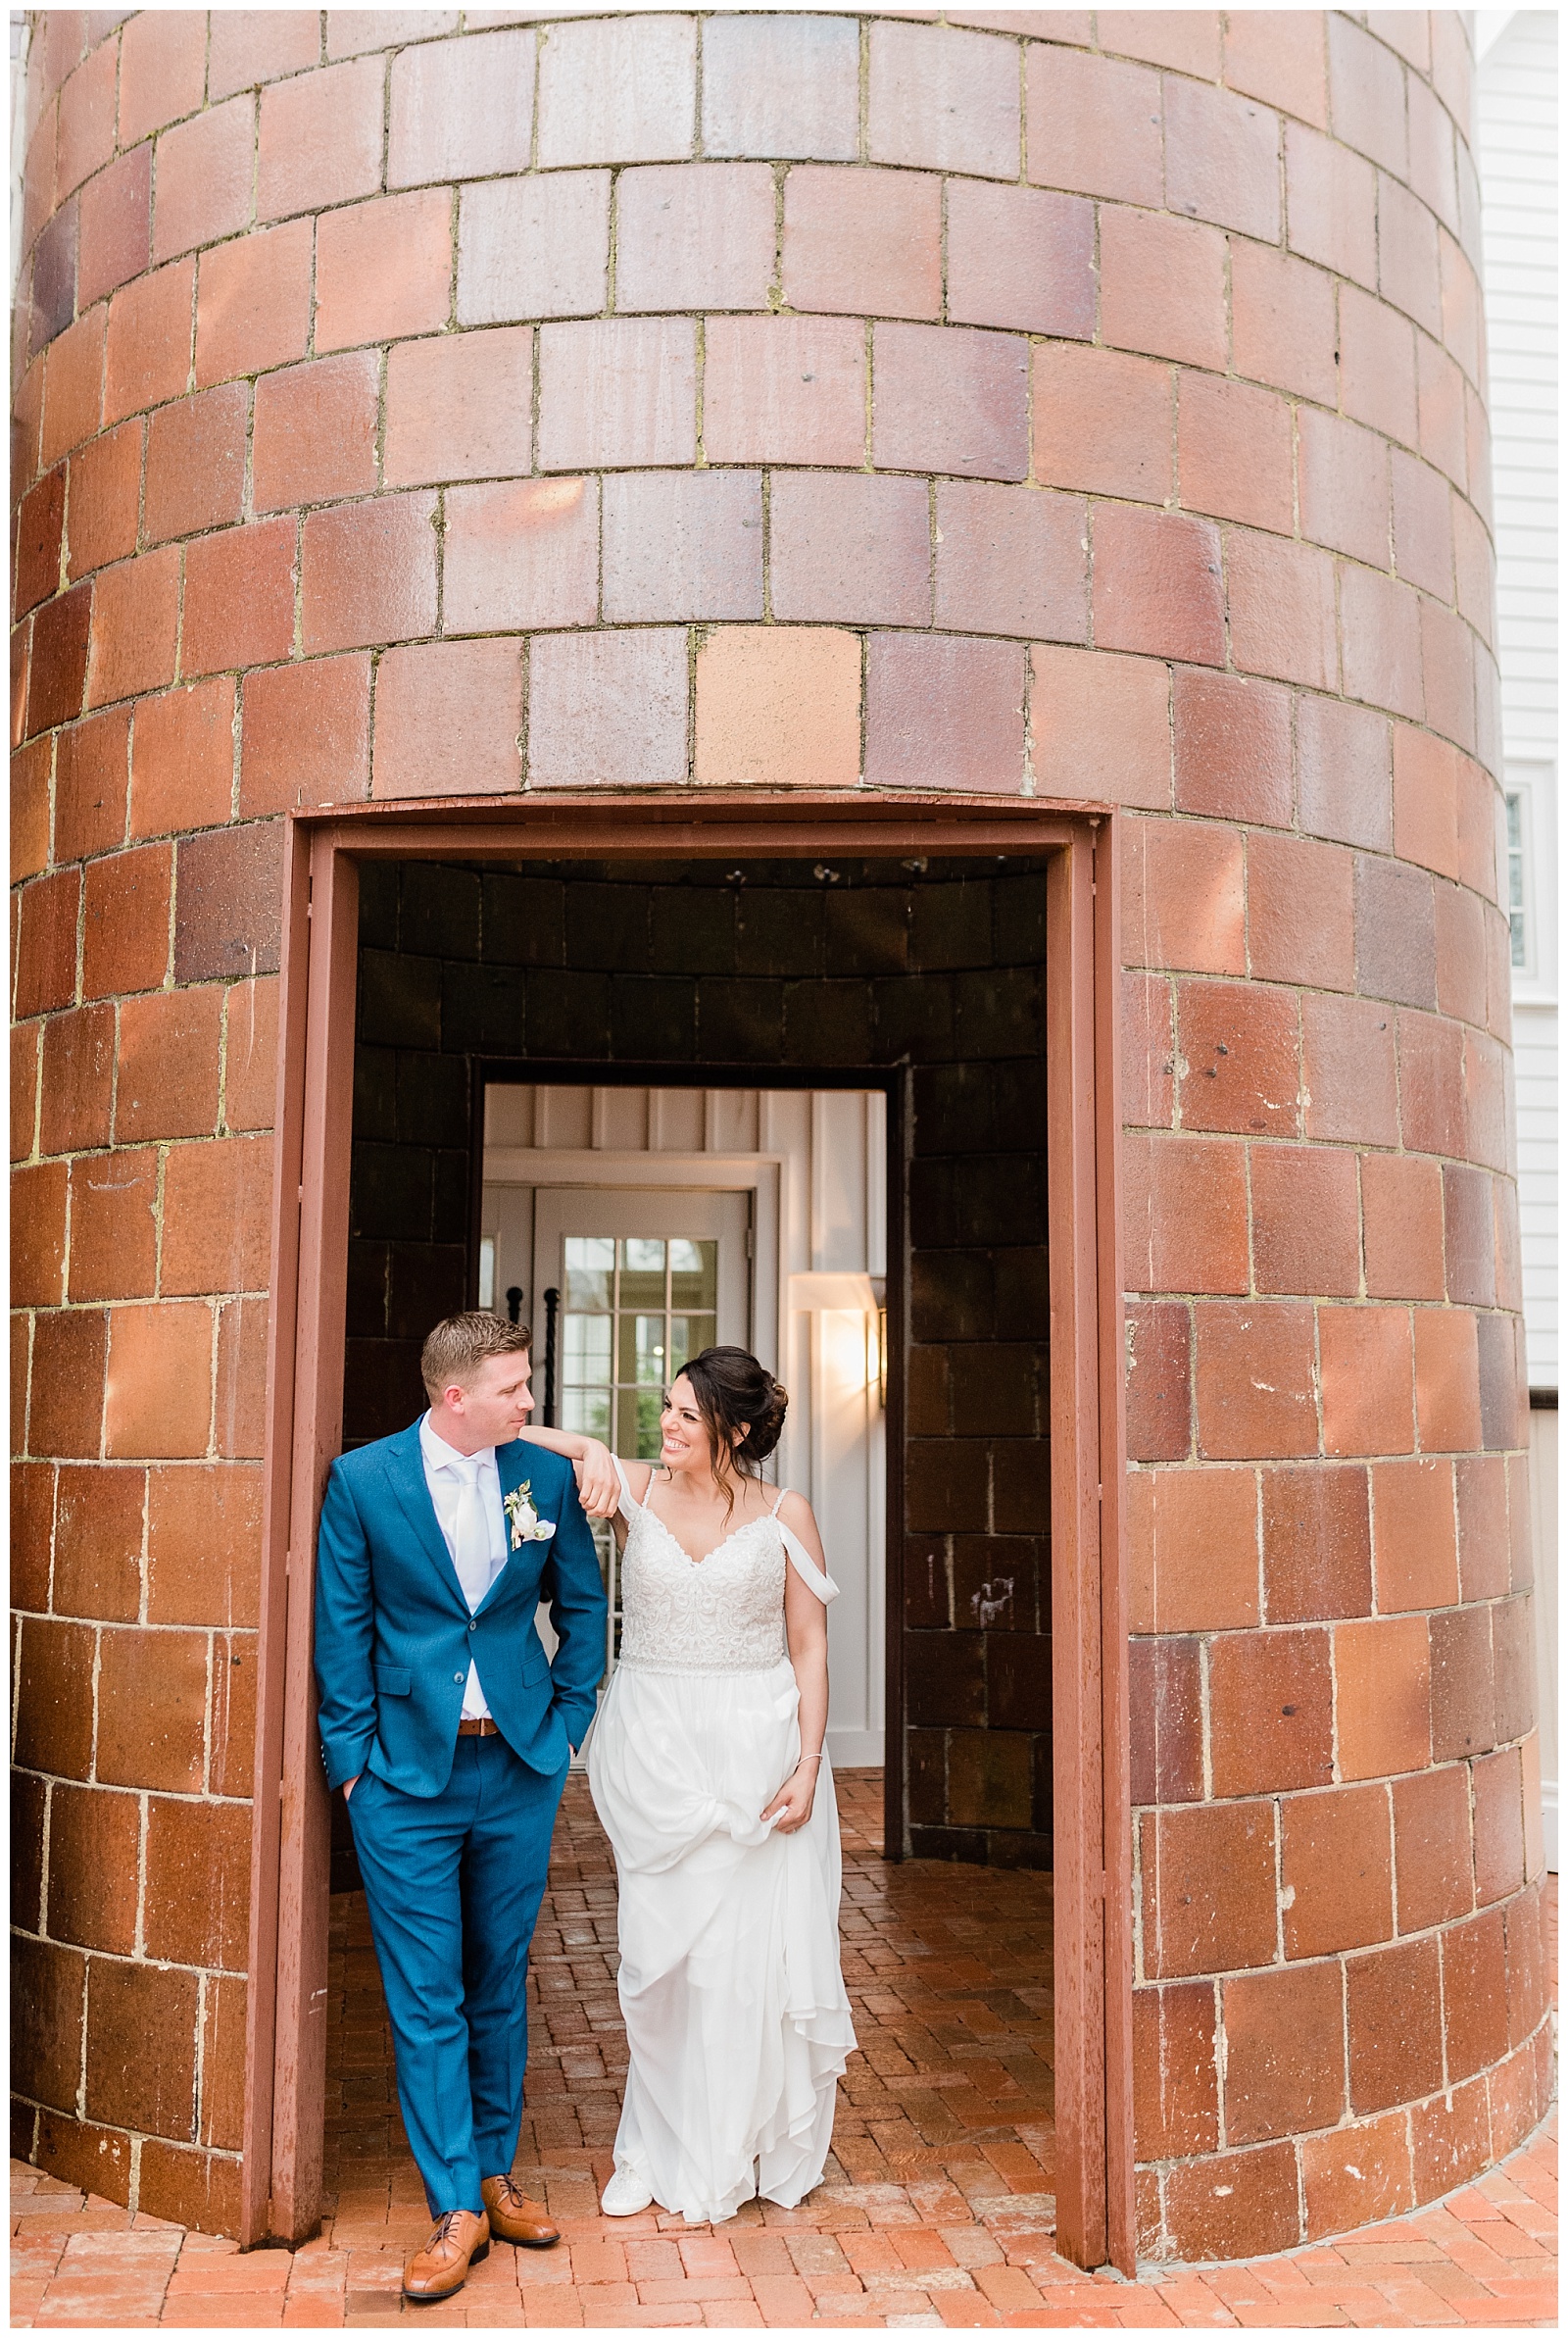 Bride leans on the groom's shoulder in the doorway of a silo at the Coach House at Ryland Inn.